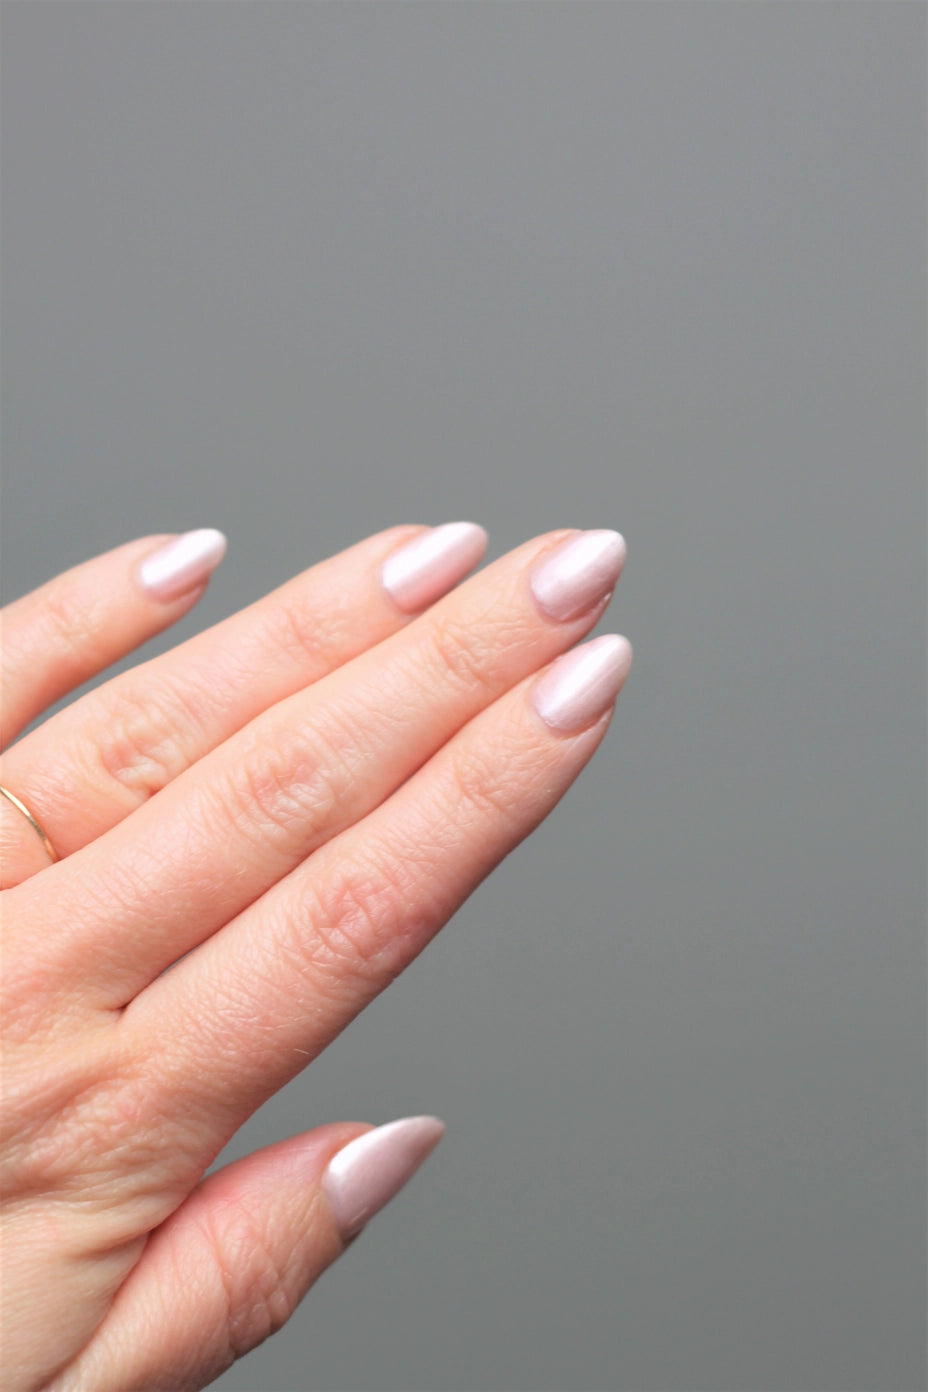 Nail Lacquer - Oleander